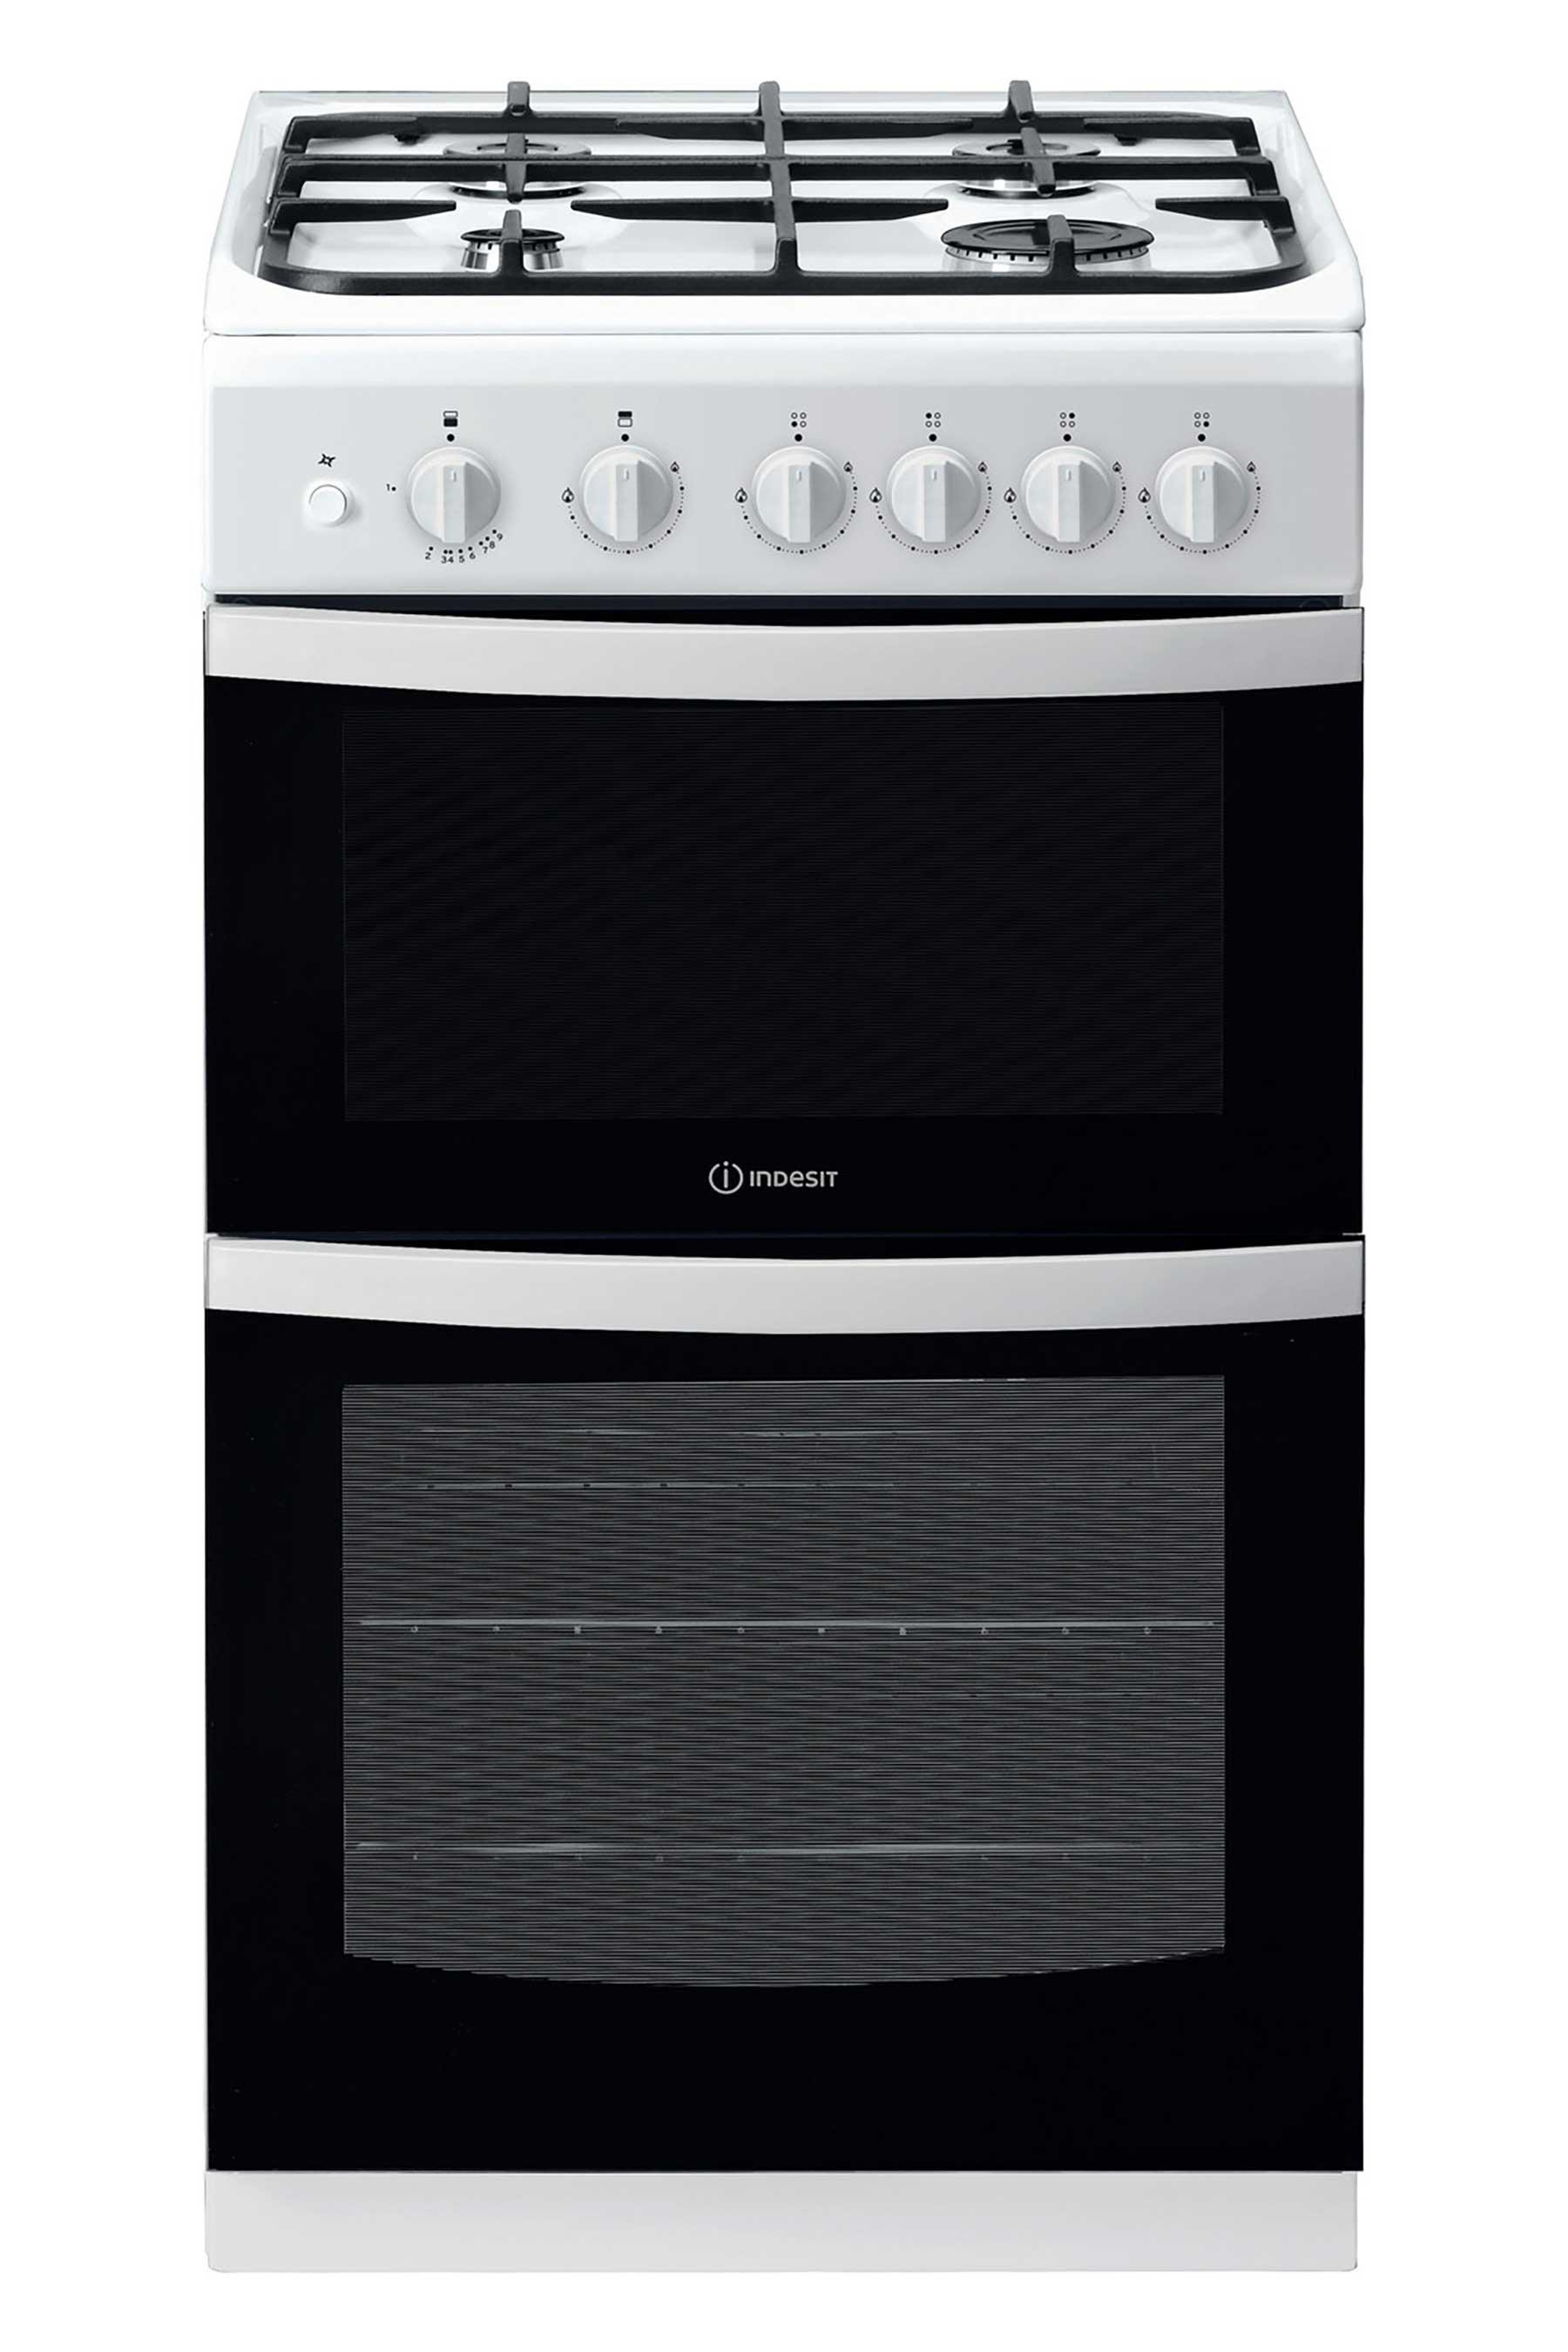 indesit 50cm twin cavity gas cooker - white